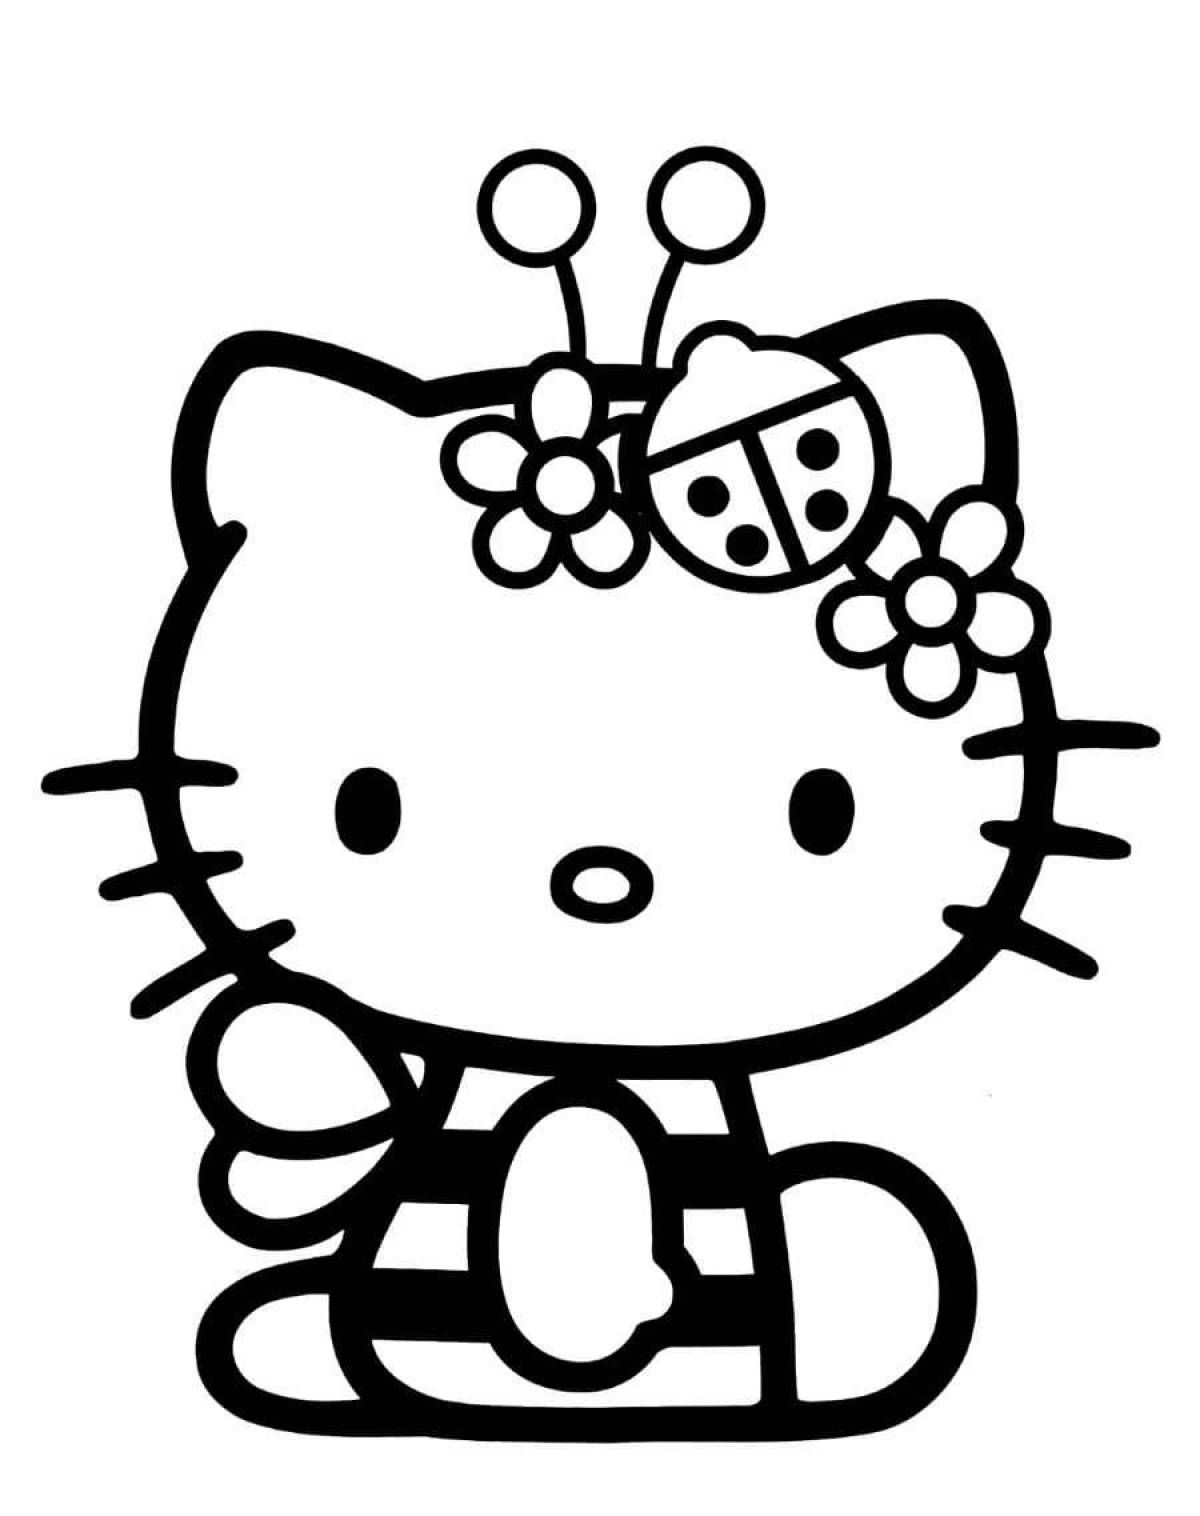 Exquisite hello kitty with clothes